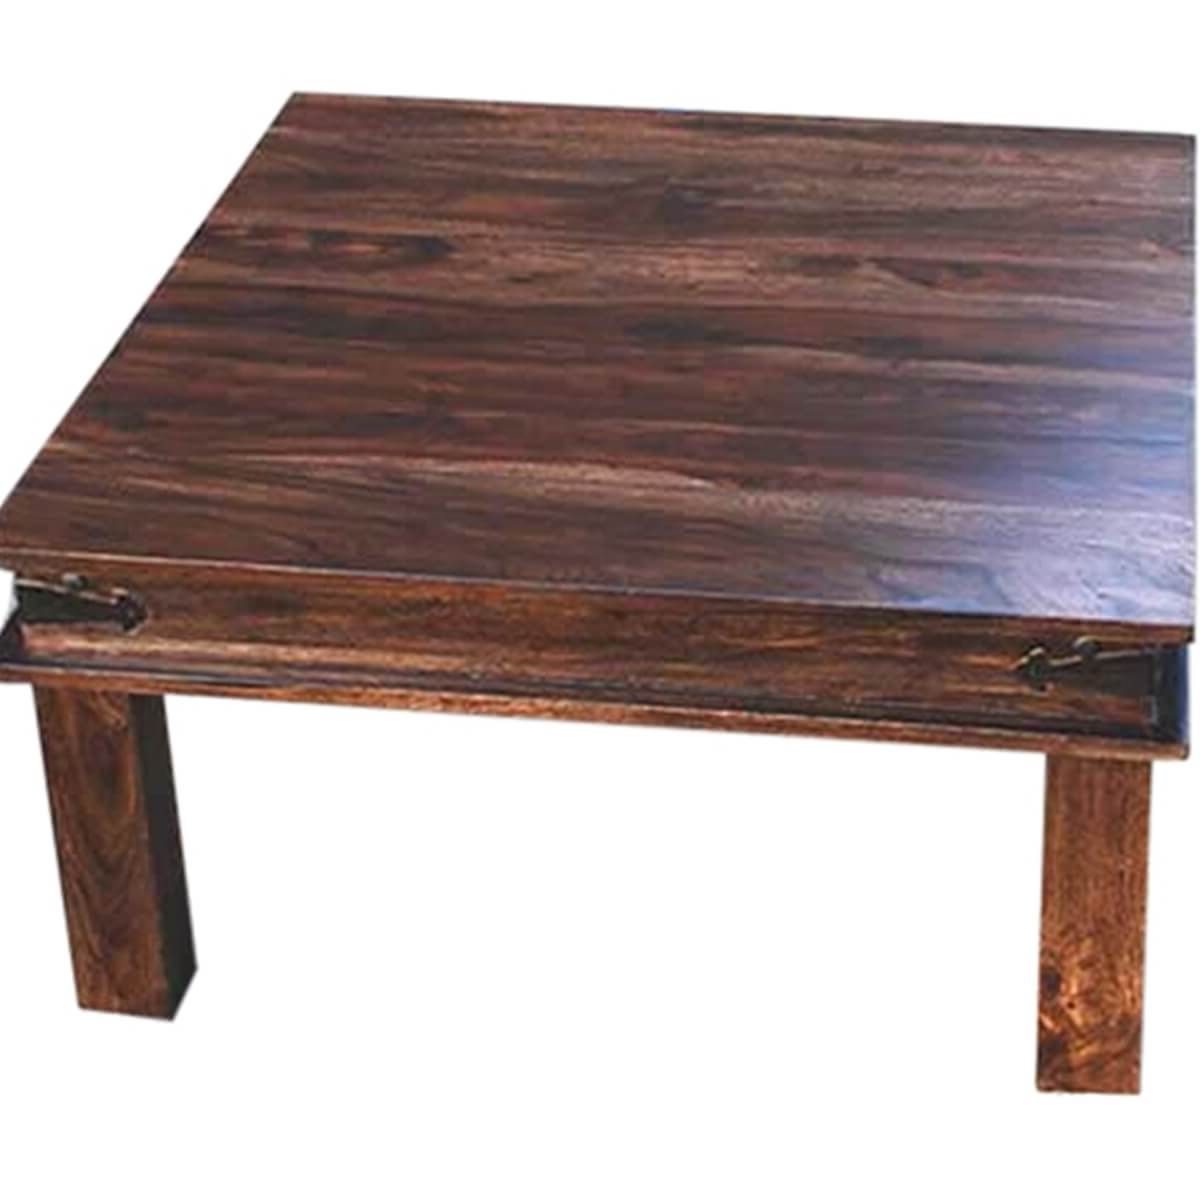 Rustic Espresso Wood Console Tables Within Widely Used Rustic Solid Wood Square Cocktail Coffee Table (View 4 of 10)